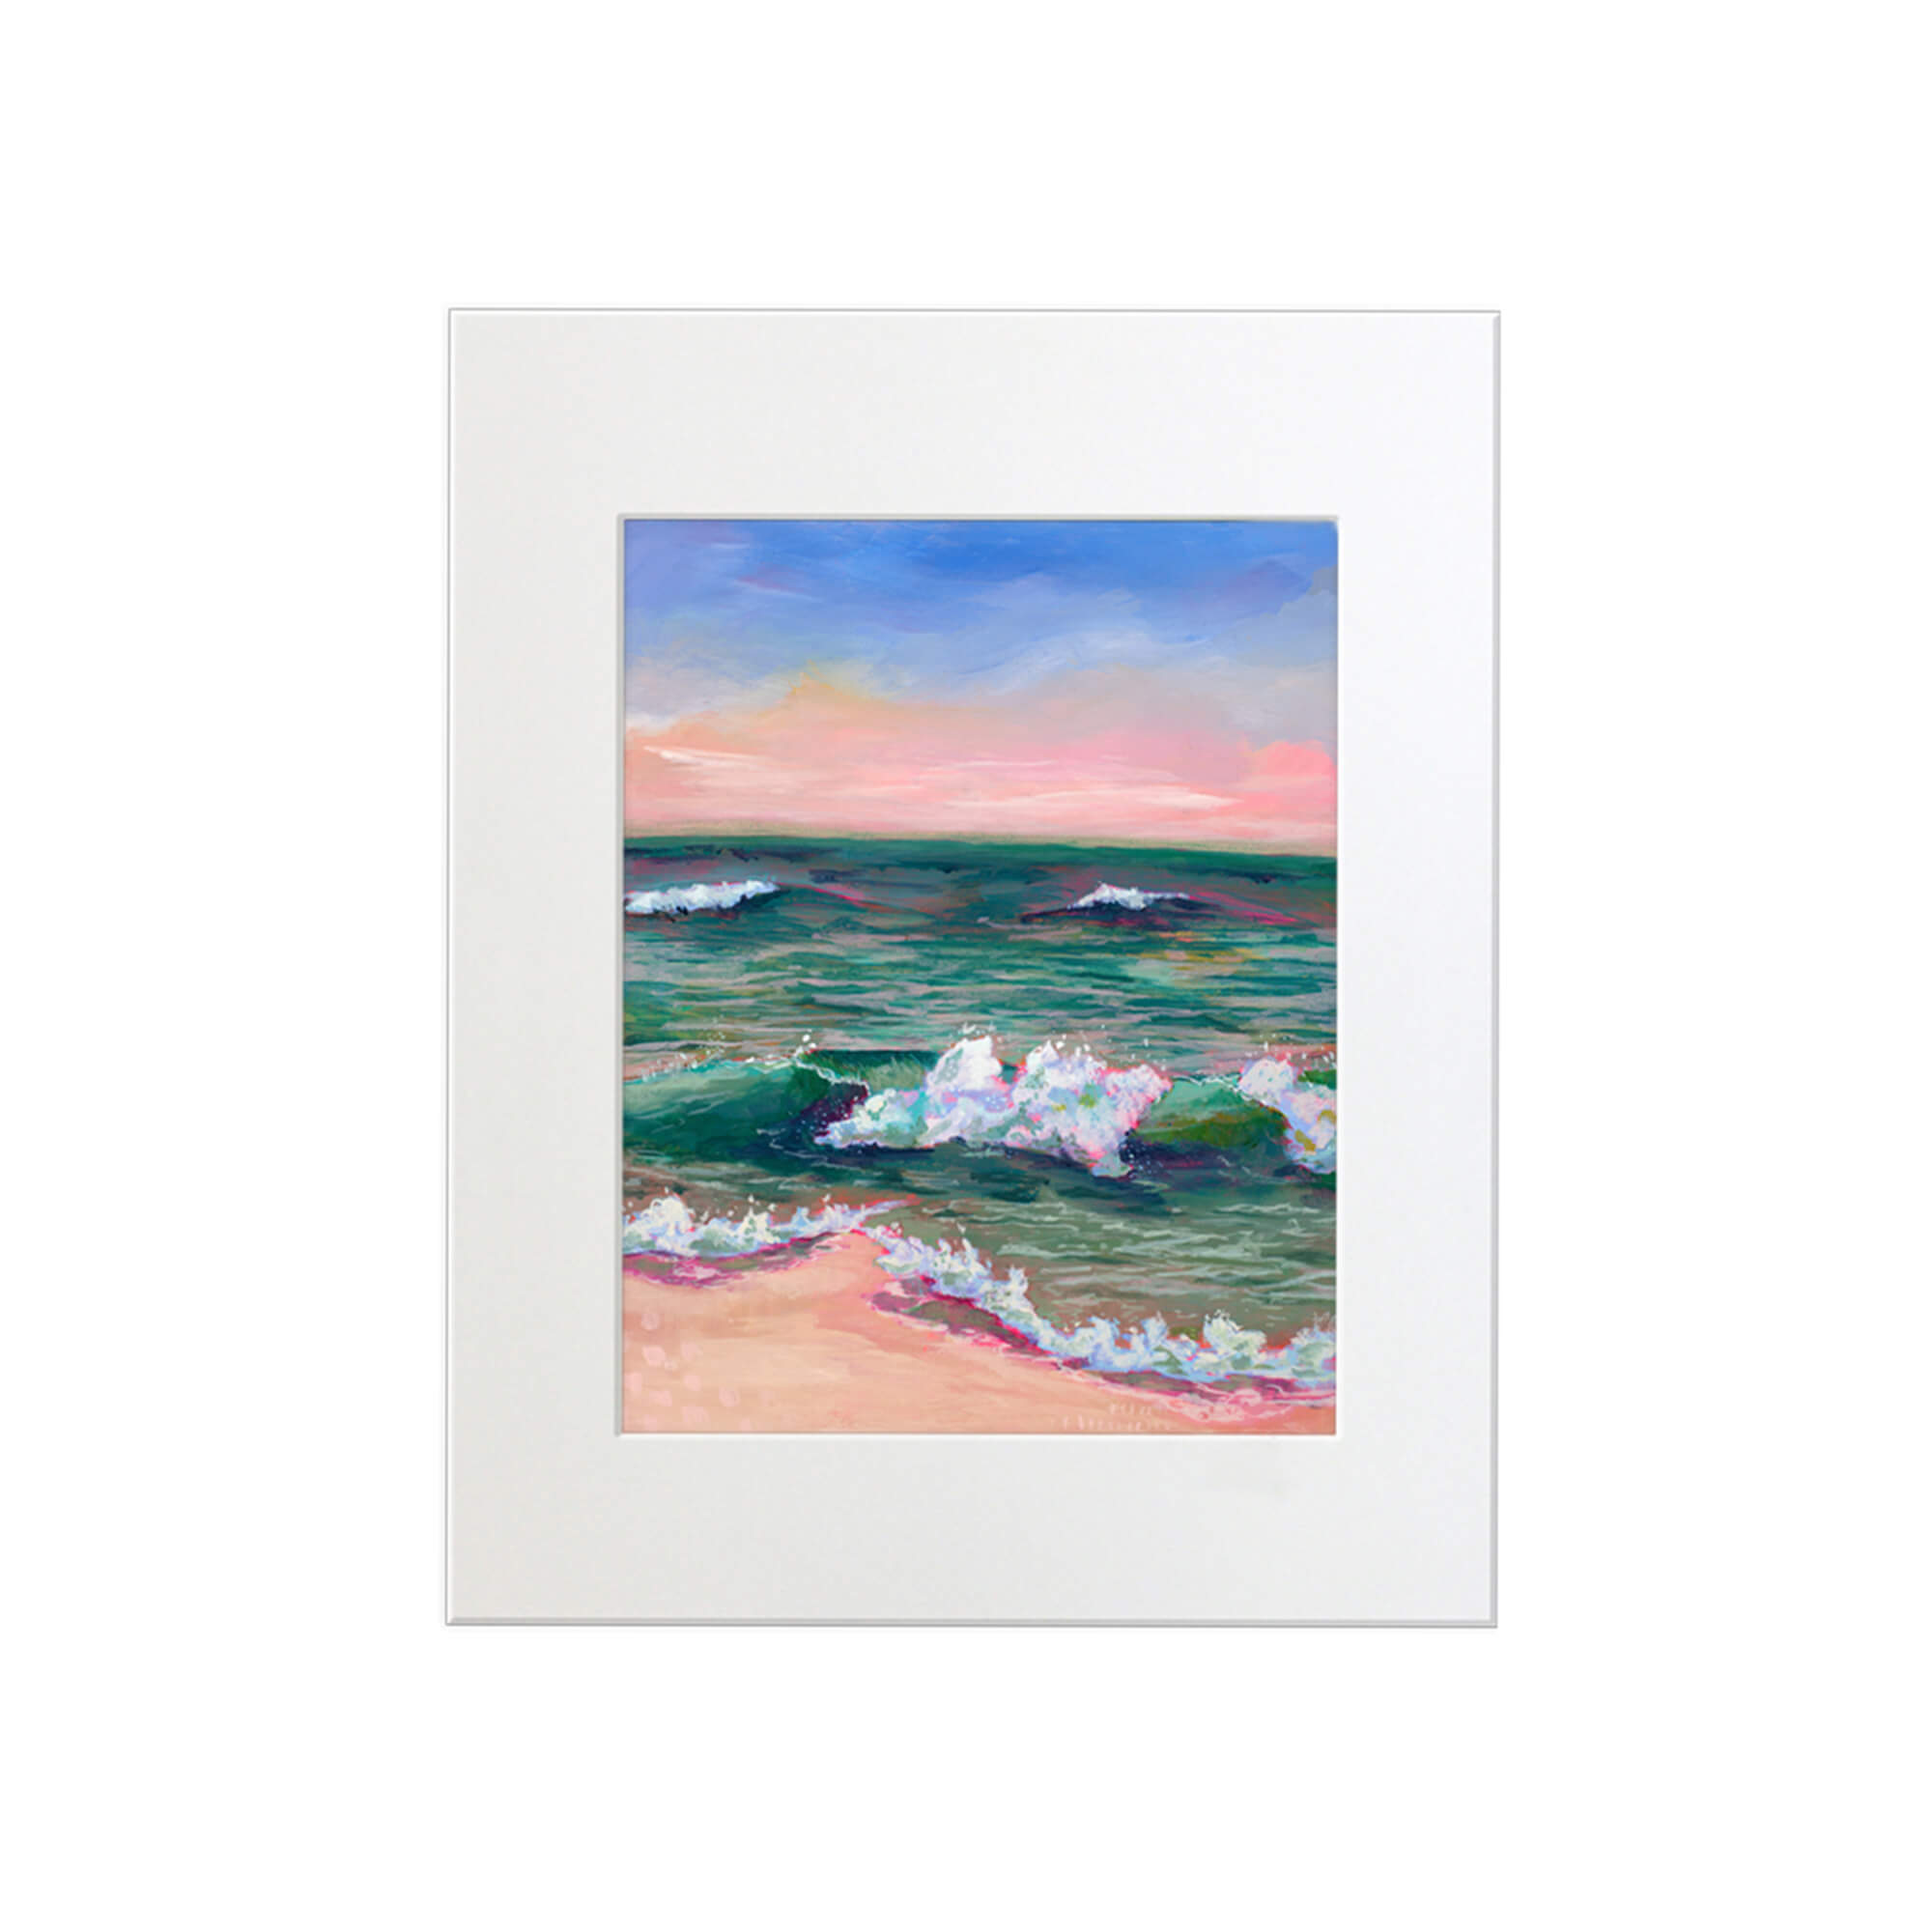 A stunning seascape with dream-like colors by Hawaii artist Lindsay Wilkins